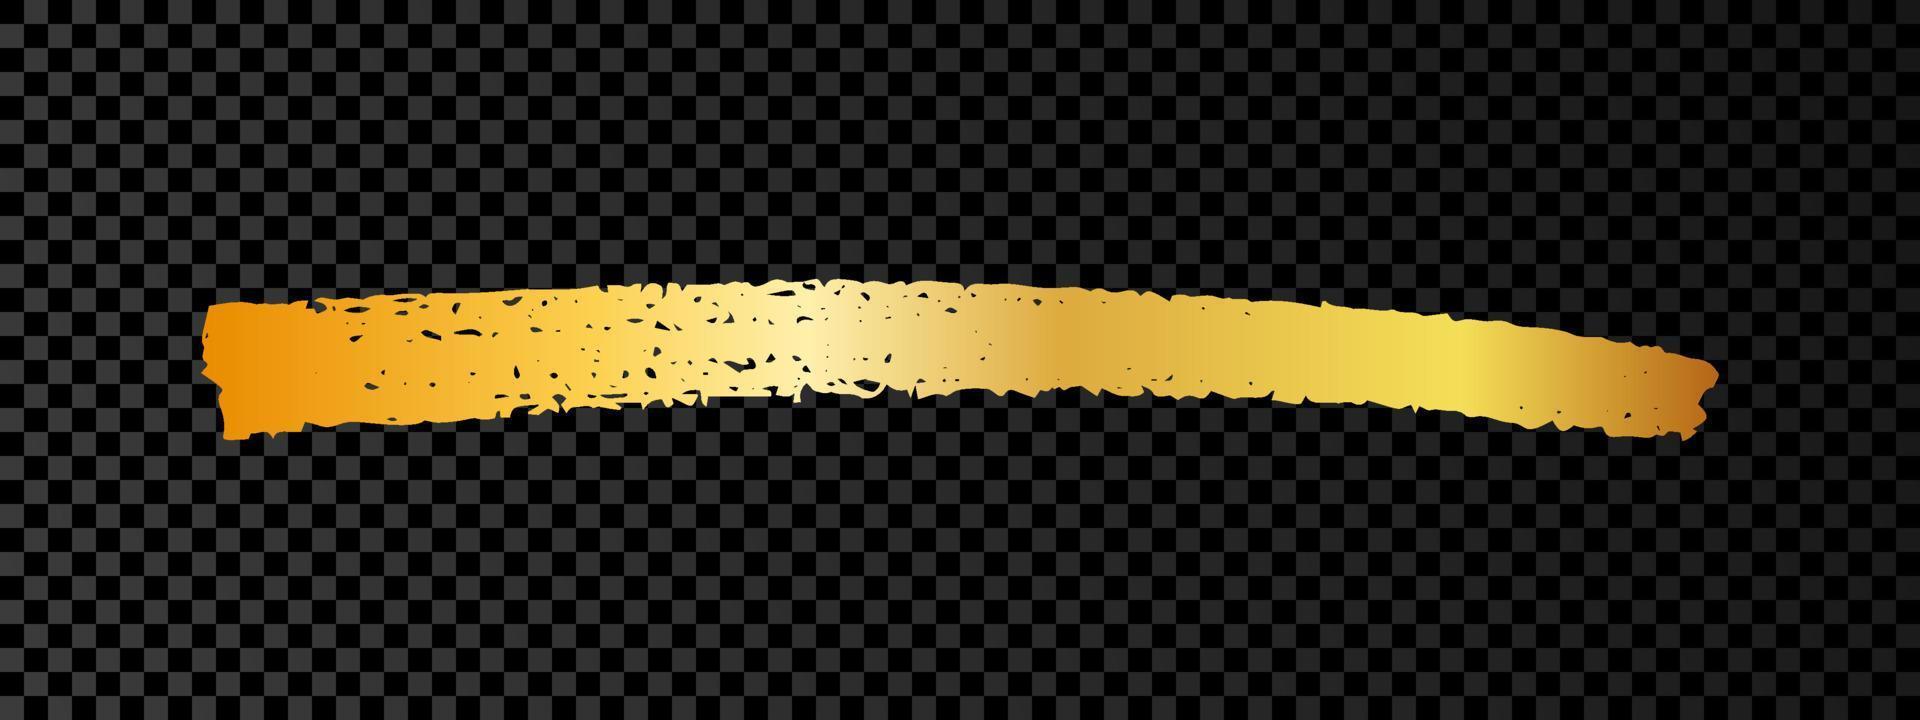 Gold paint brush smear stroke. Abstract gold glittering sketch scribble smear on dark background. Vector illustration.